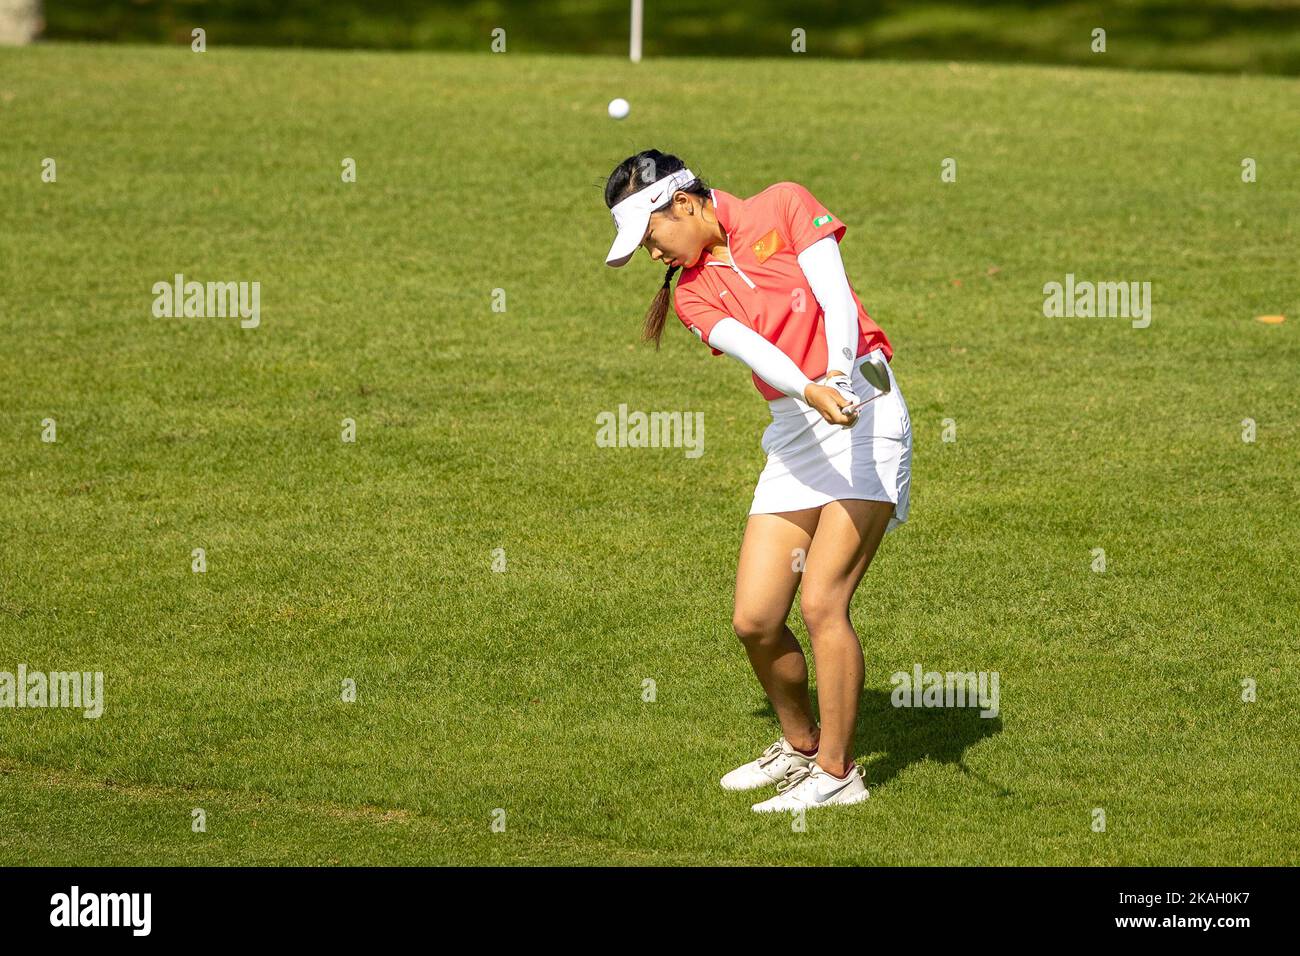 CHONBURI, THAILAND - NOVEMBER 3: Lei Ye of China on hole 8 during the first round at the Women Amateur Asia-Pacific Championship 2022 at Siam Country Club, Waterside on November 3, 2022 in CHONBURI, THAILAND (Photo by Peter van der Klooster/Alamy Live News) Stock Photo